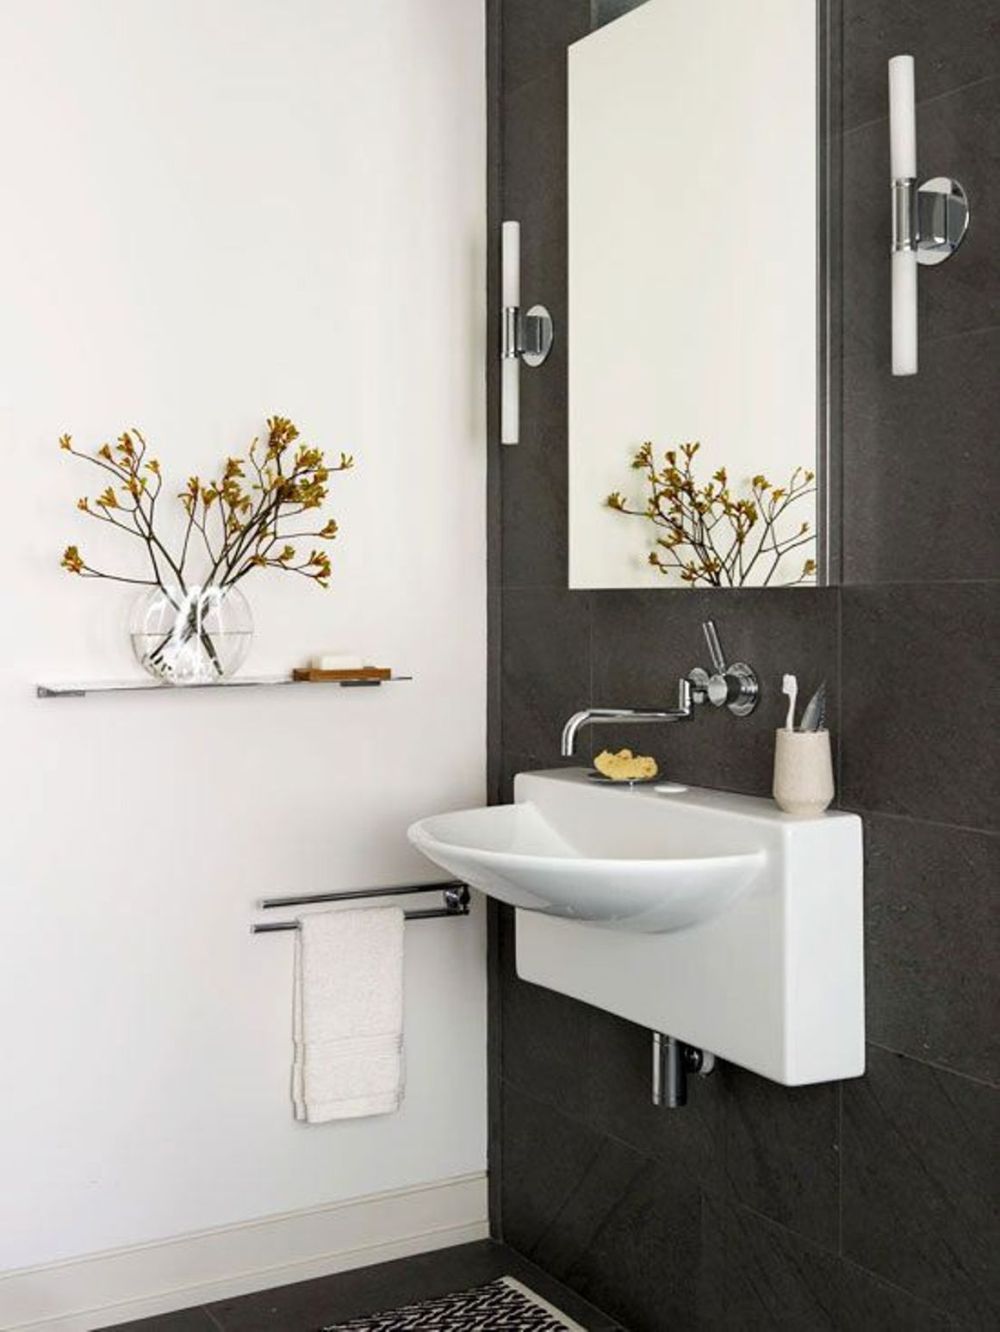 wall mount sinks for small bathrooms ideas with wall mounted mirror amazing sink design for small bathroom